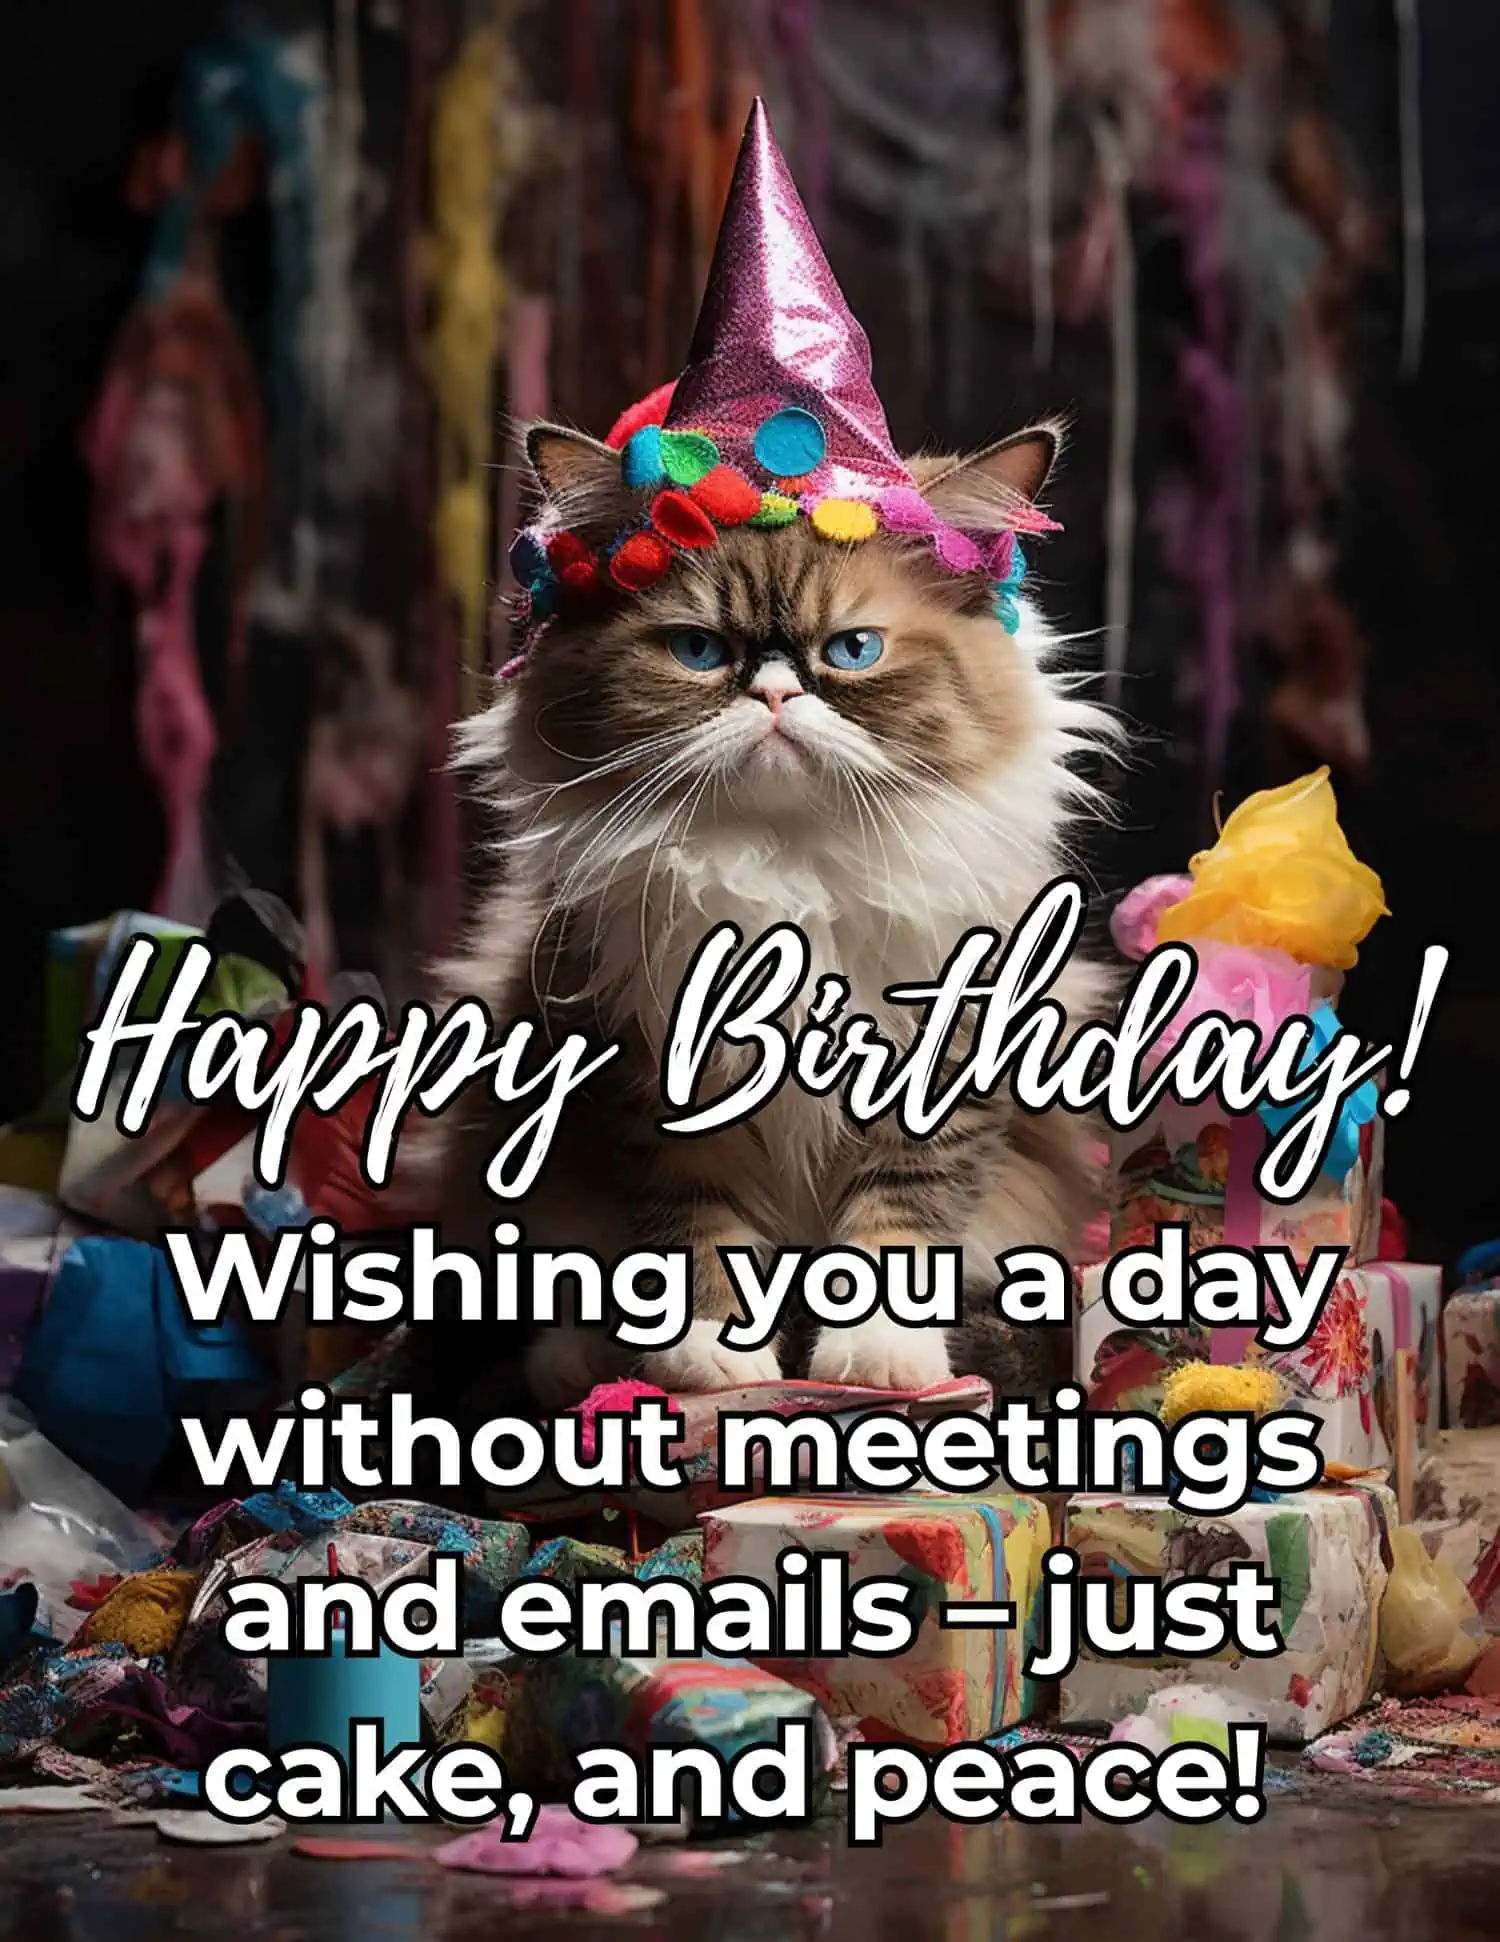 Delight your boss with a touch of humor on their special day with these witty and funny birthday wishes, perfect for adding a bit of light-hearted fun to the celebration.